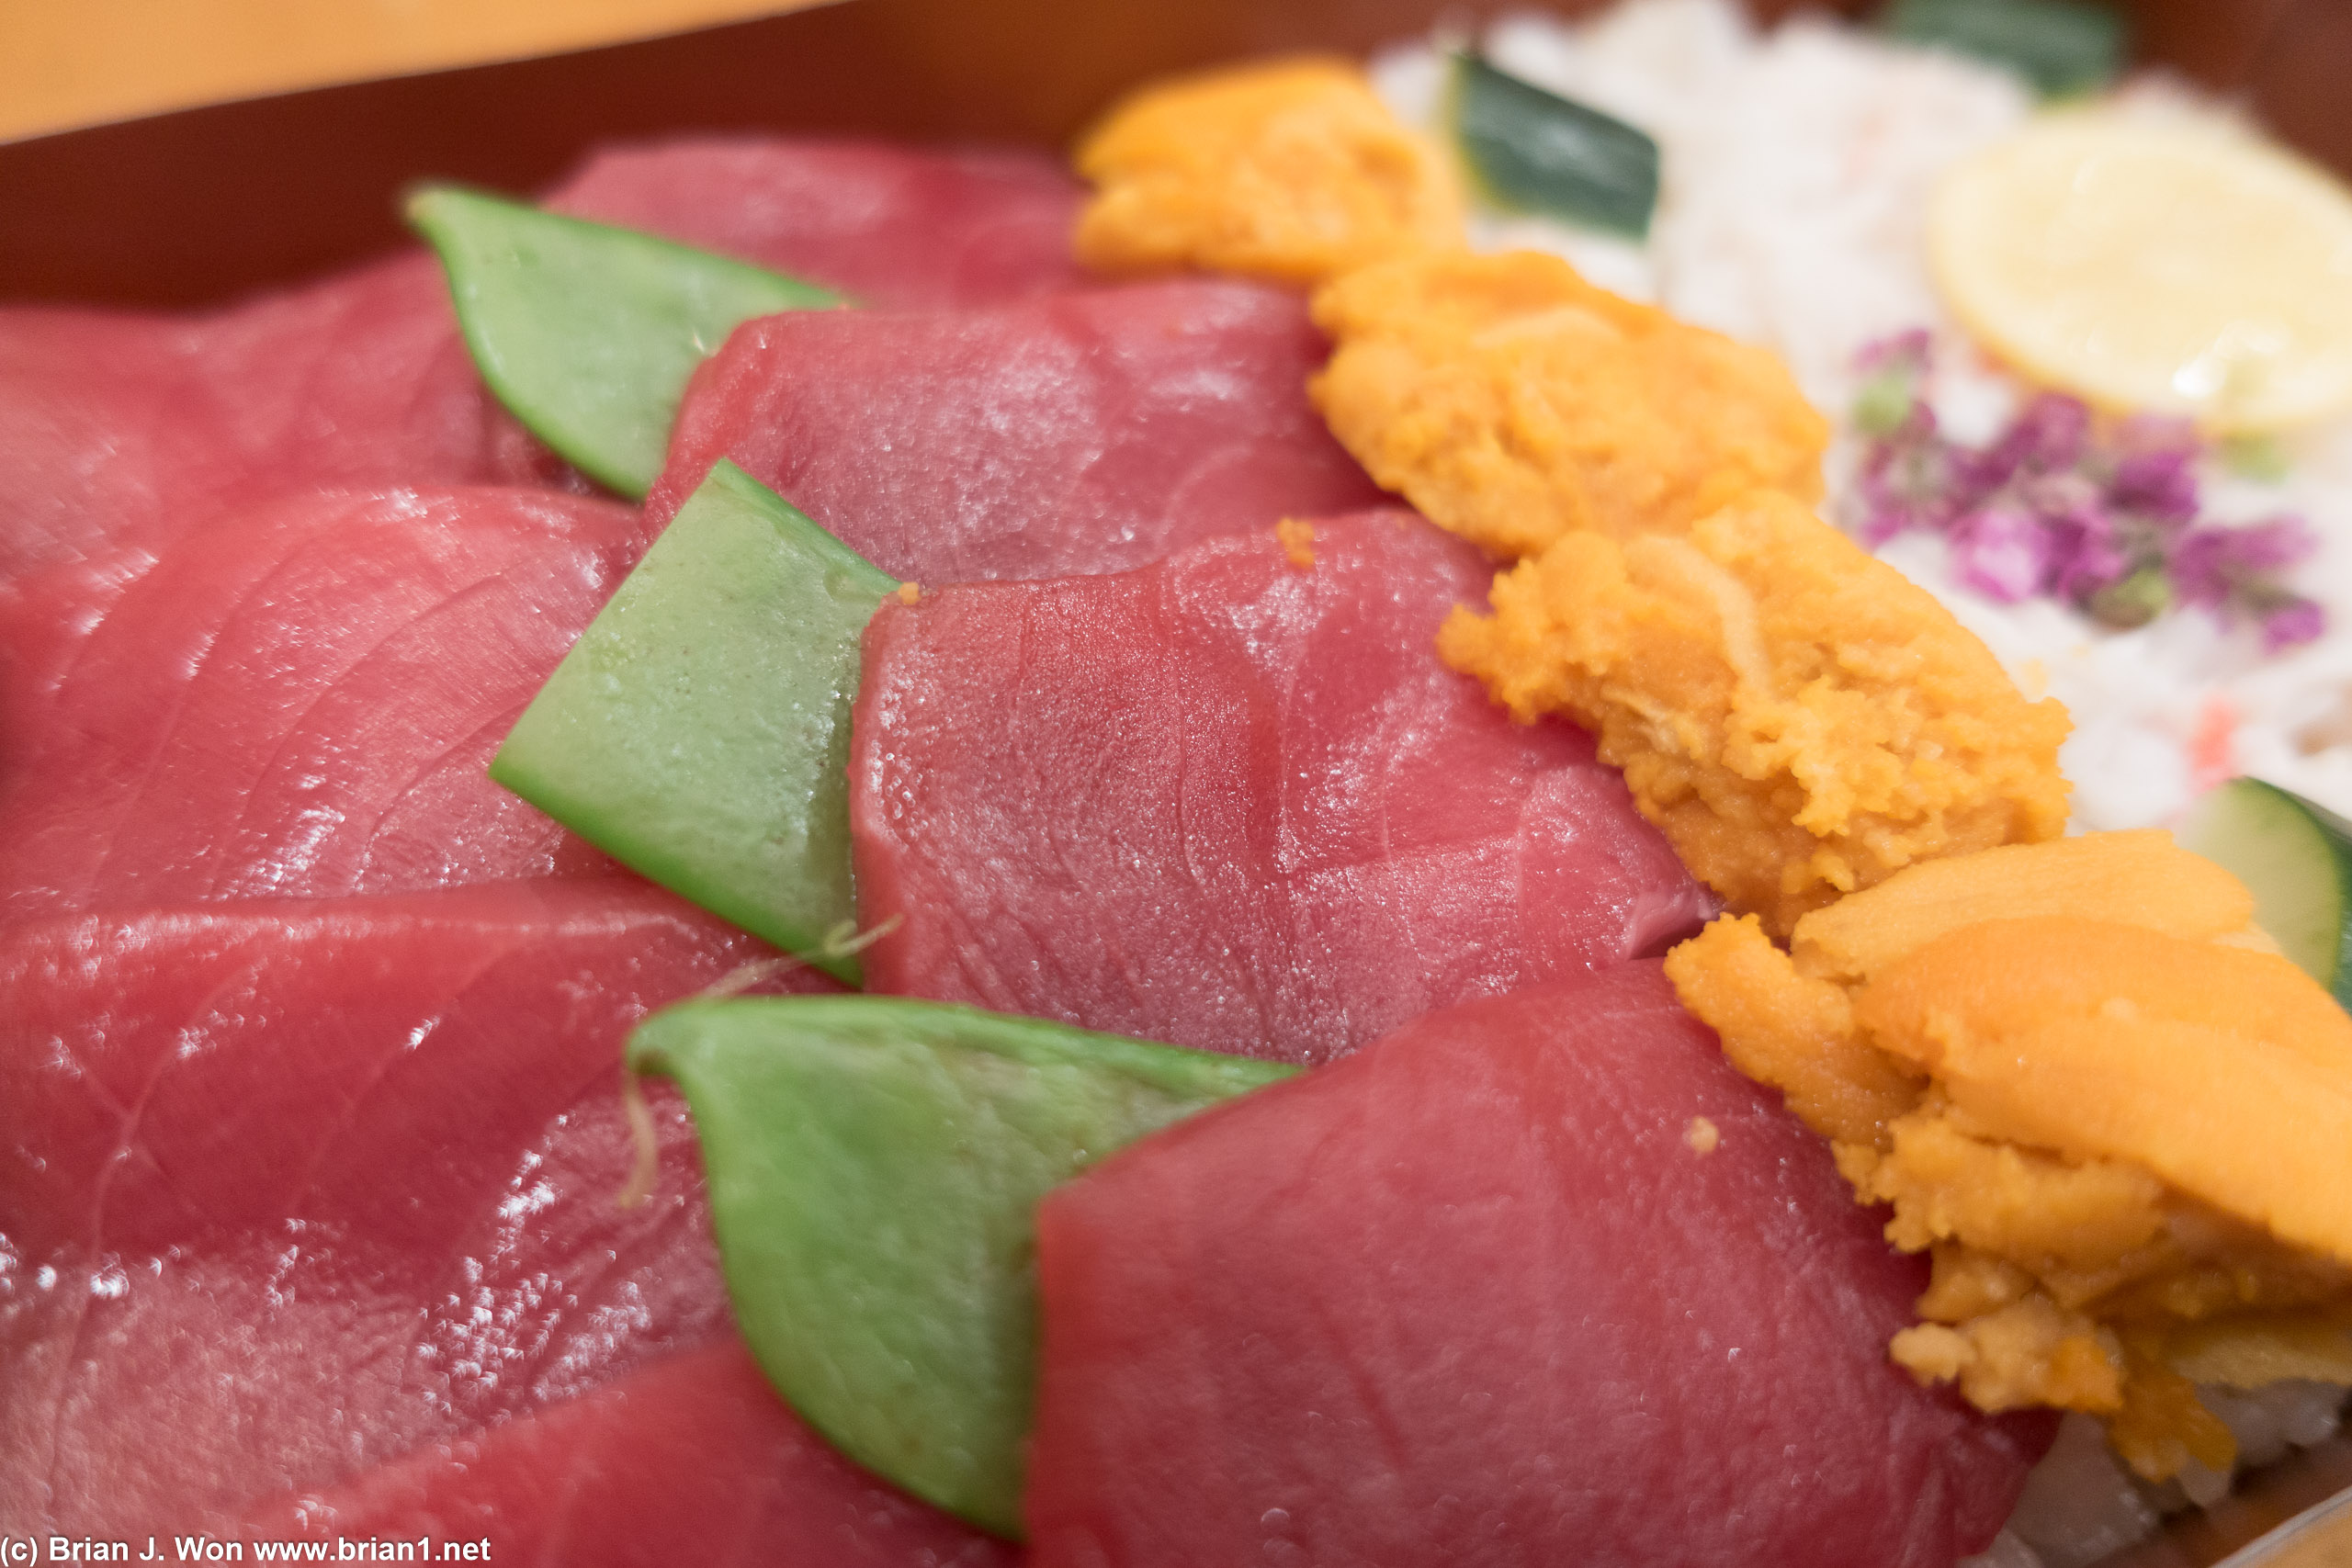 Yes, that is bluefin tuna.